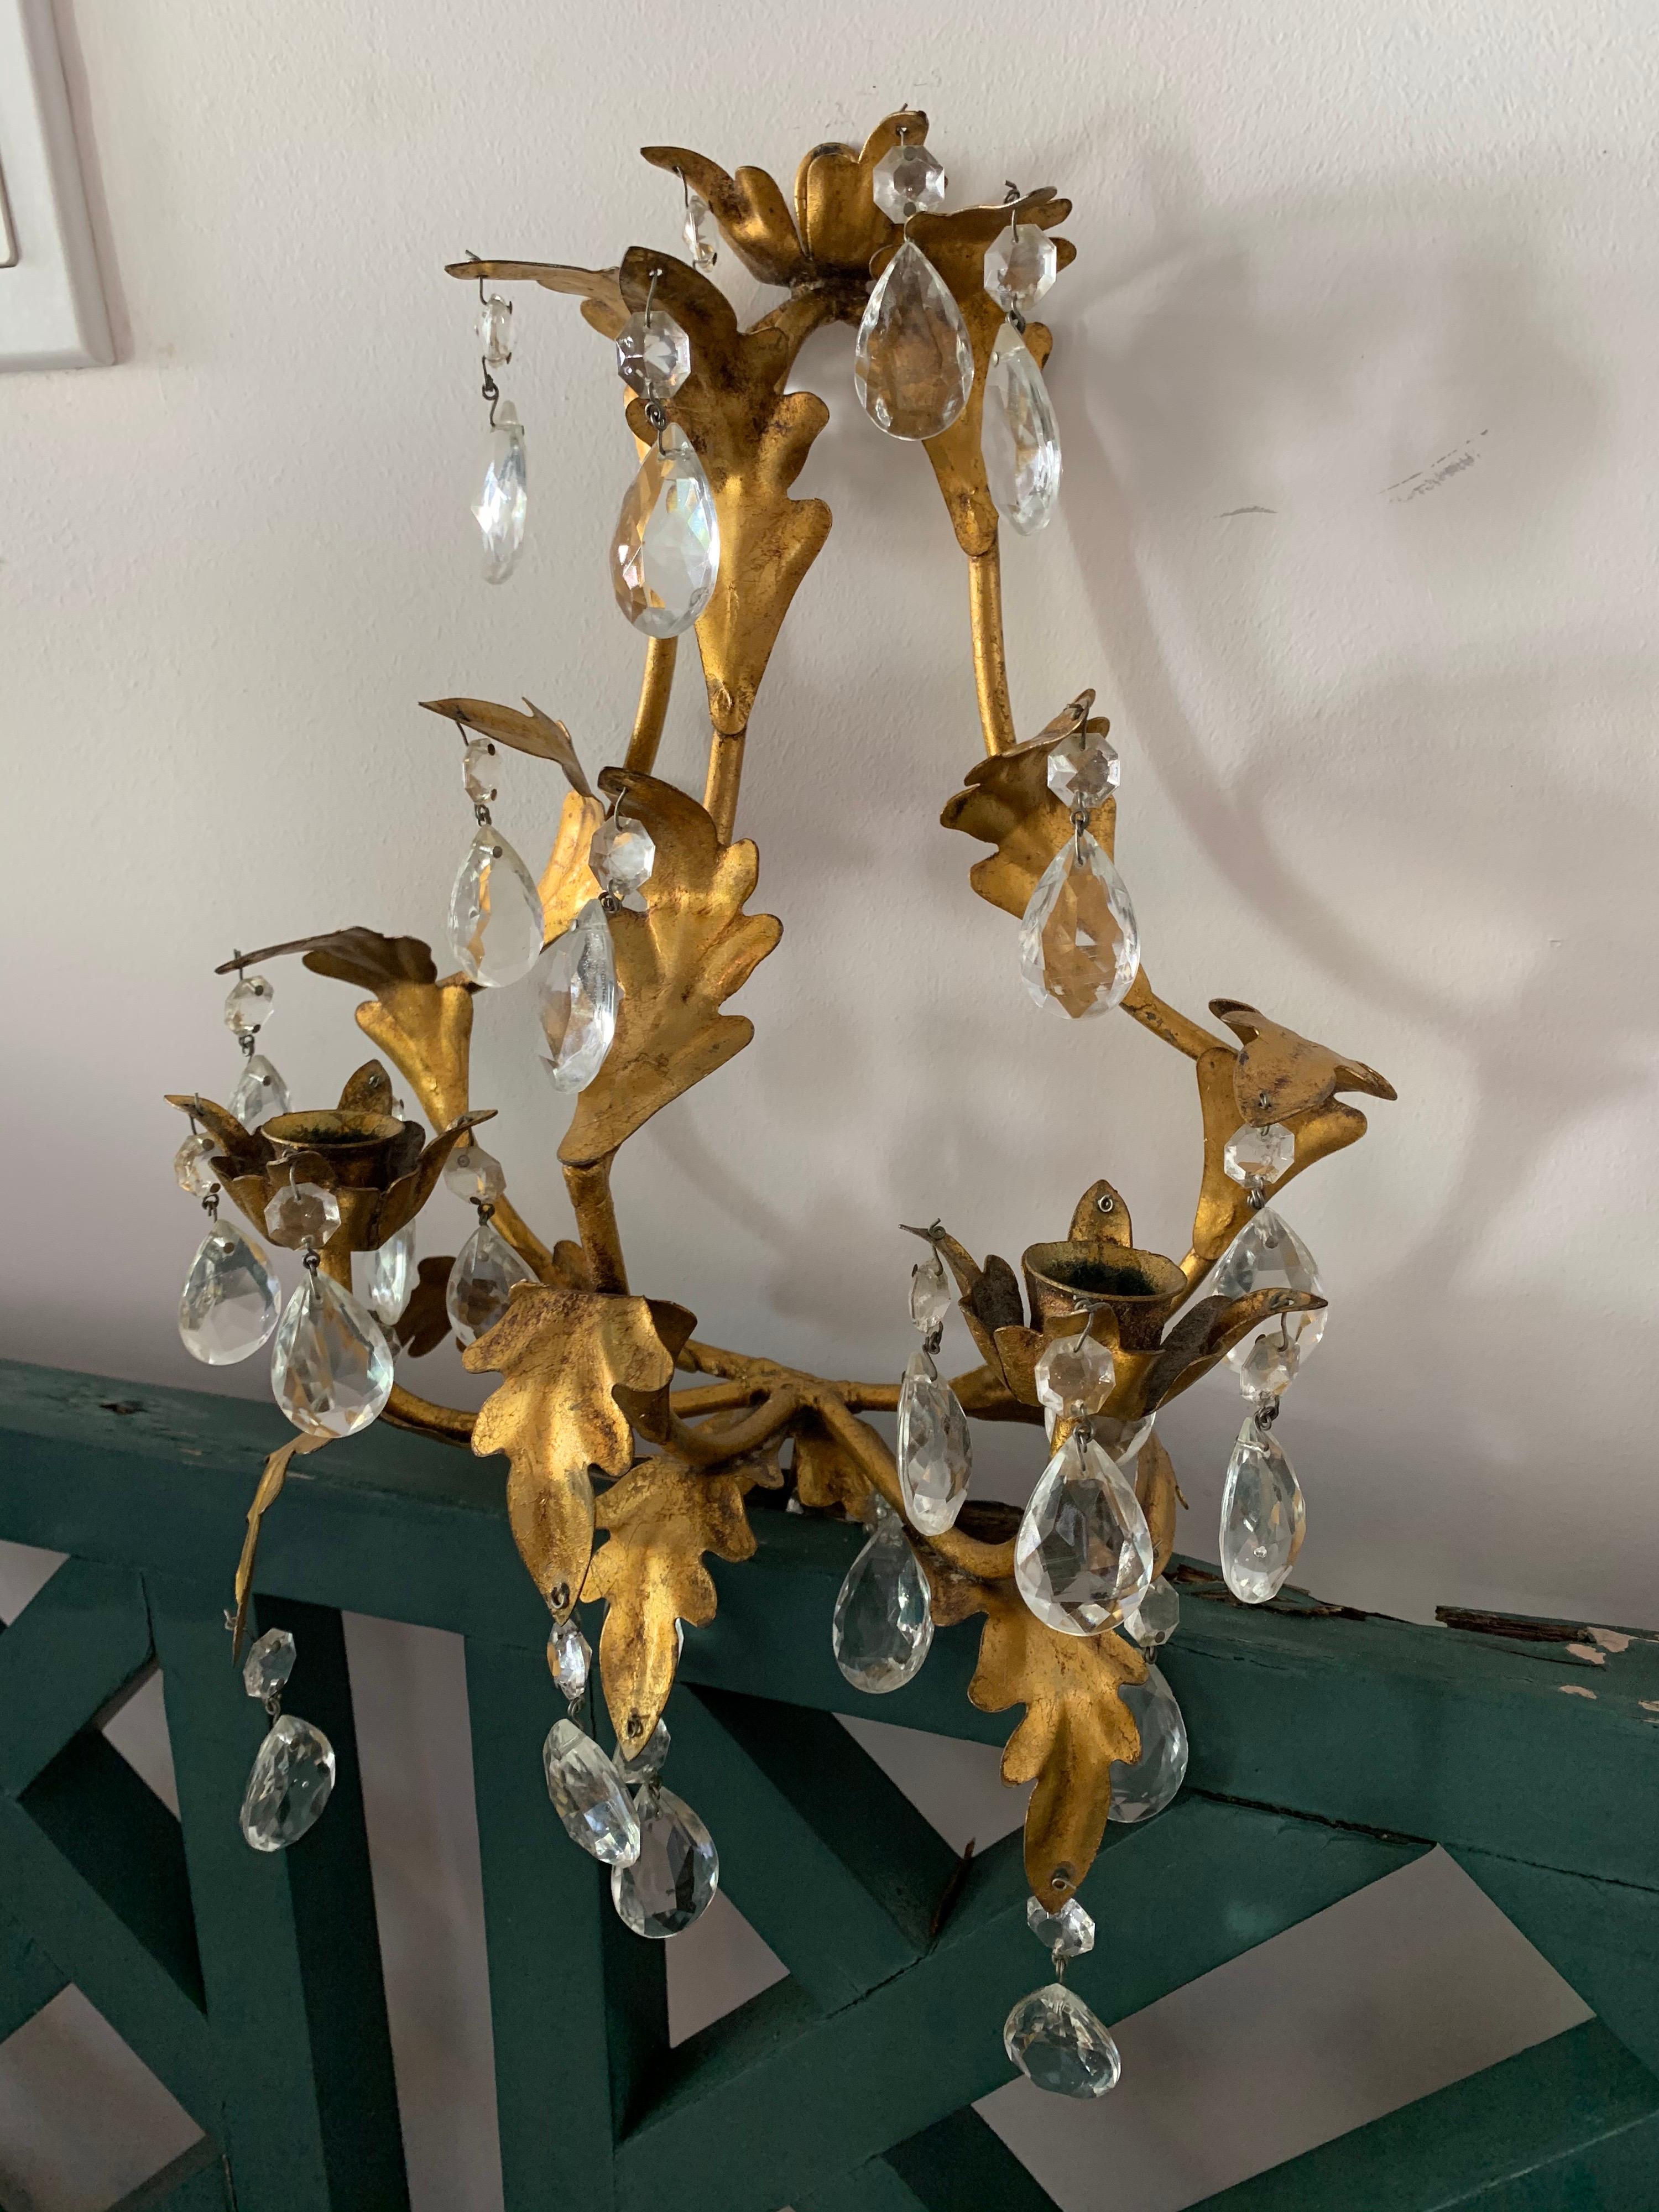 A single gilt metal wall mount candelabra sconce with two arms and glass pendant drops.

Designed to hold two candlesticks. Not electrified.

Dimensions: 11 inches W x 6.5 inches D x 15 inches H.
 